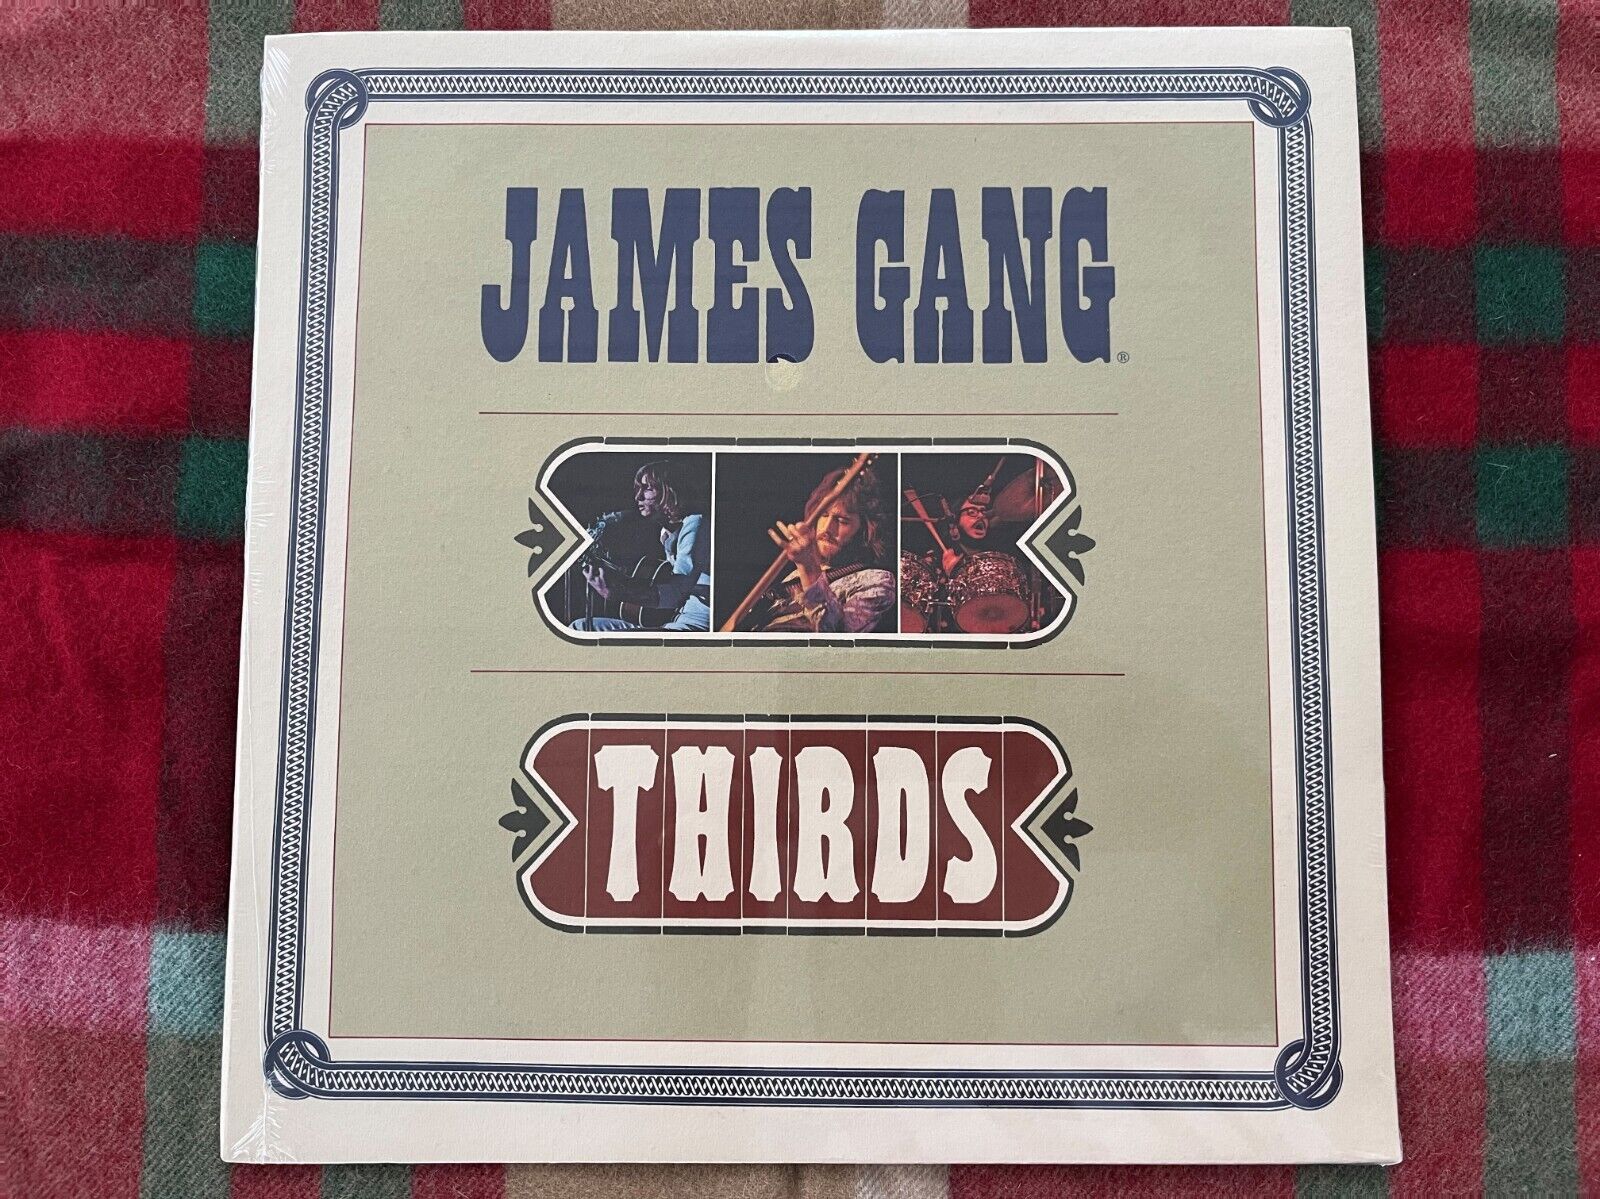 NEW NEVER OPENED JAMES GANG THIRDS CERTIFIED BY DISTRIBUTOR VINTAGE  VINYL ALBUM